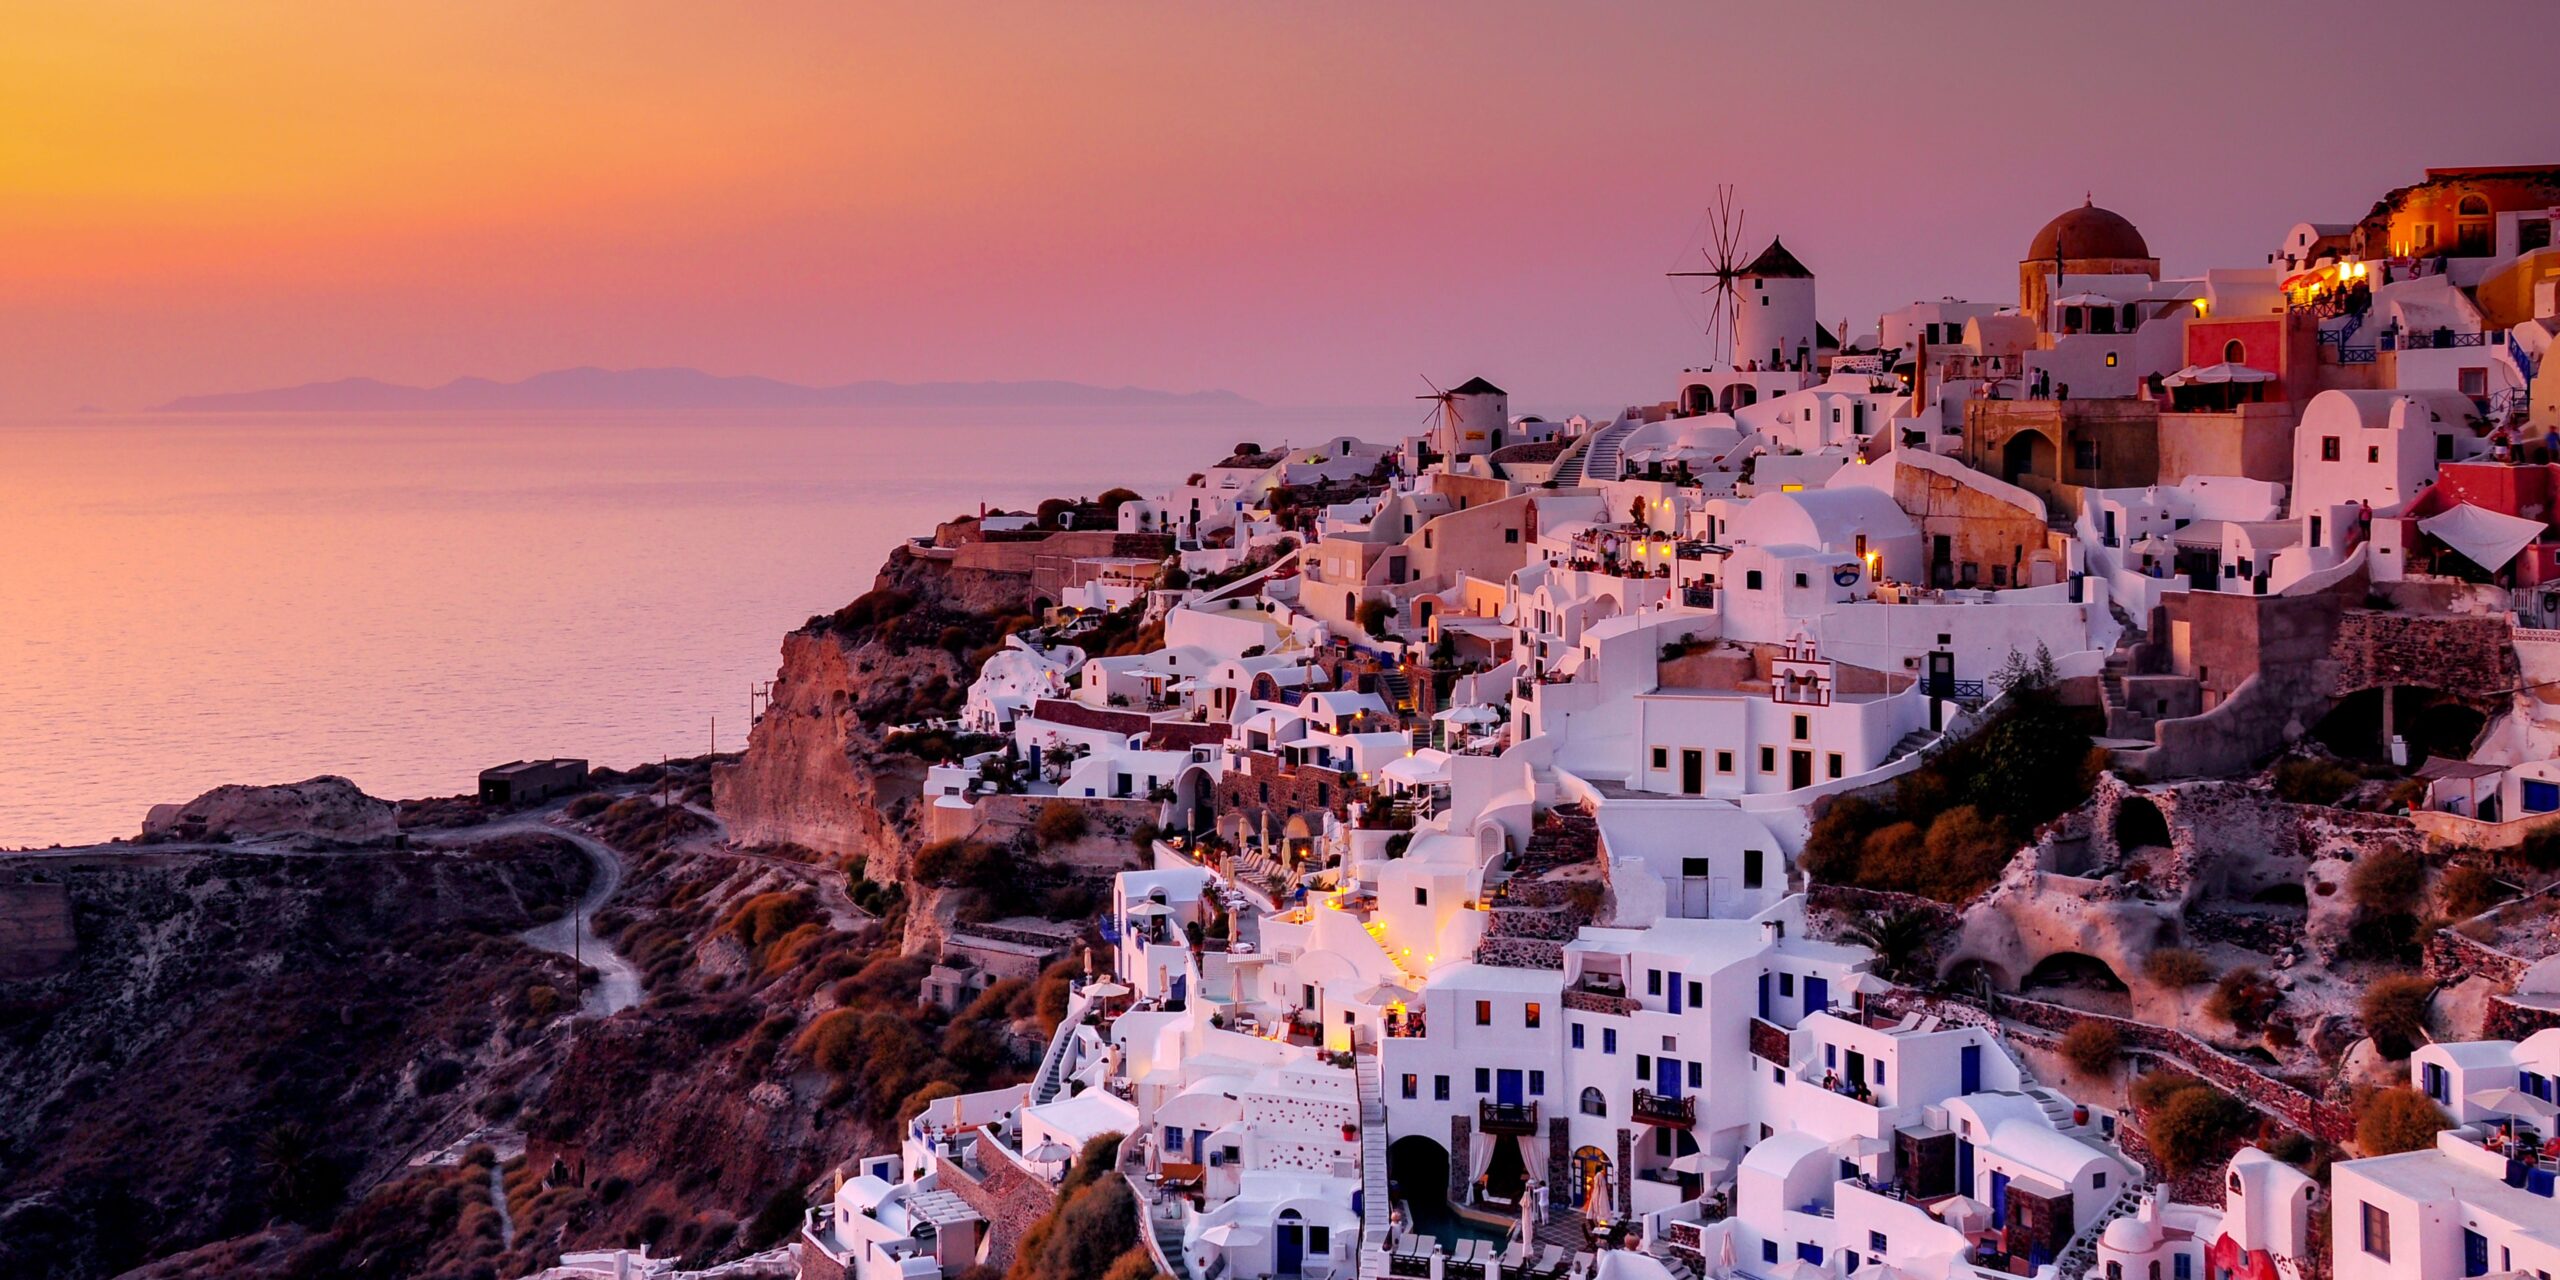 Sunset over the white buildings and windmills of Santorini's cliffside with the sea in the background.